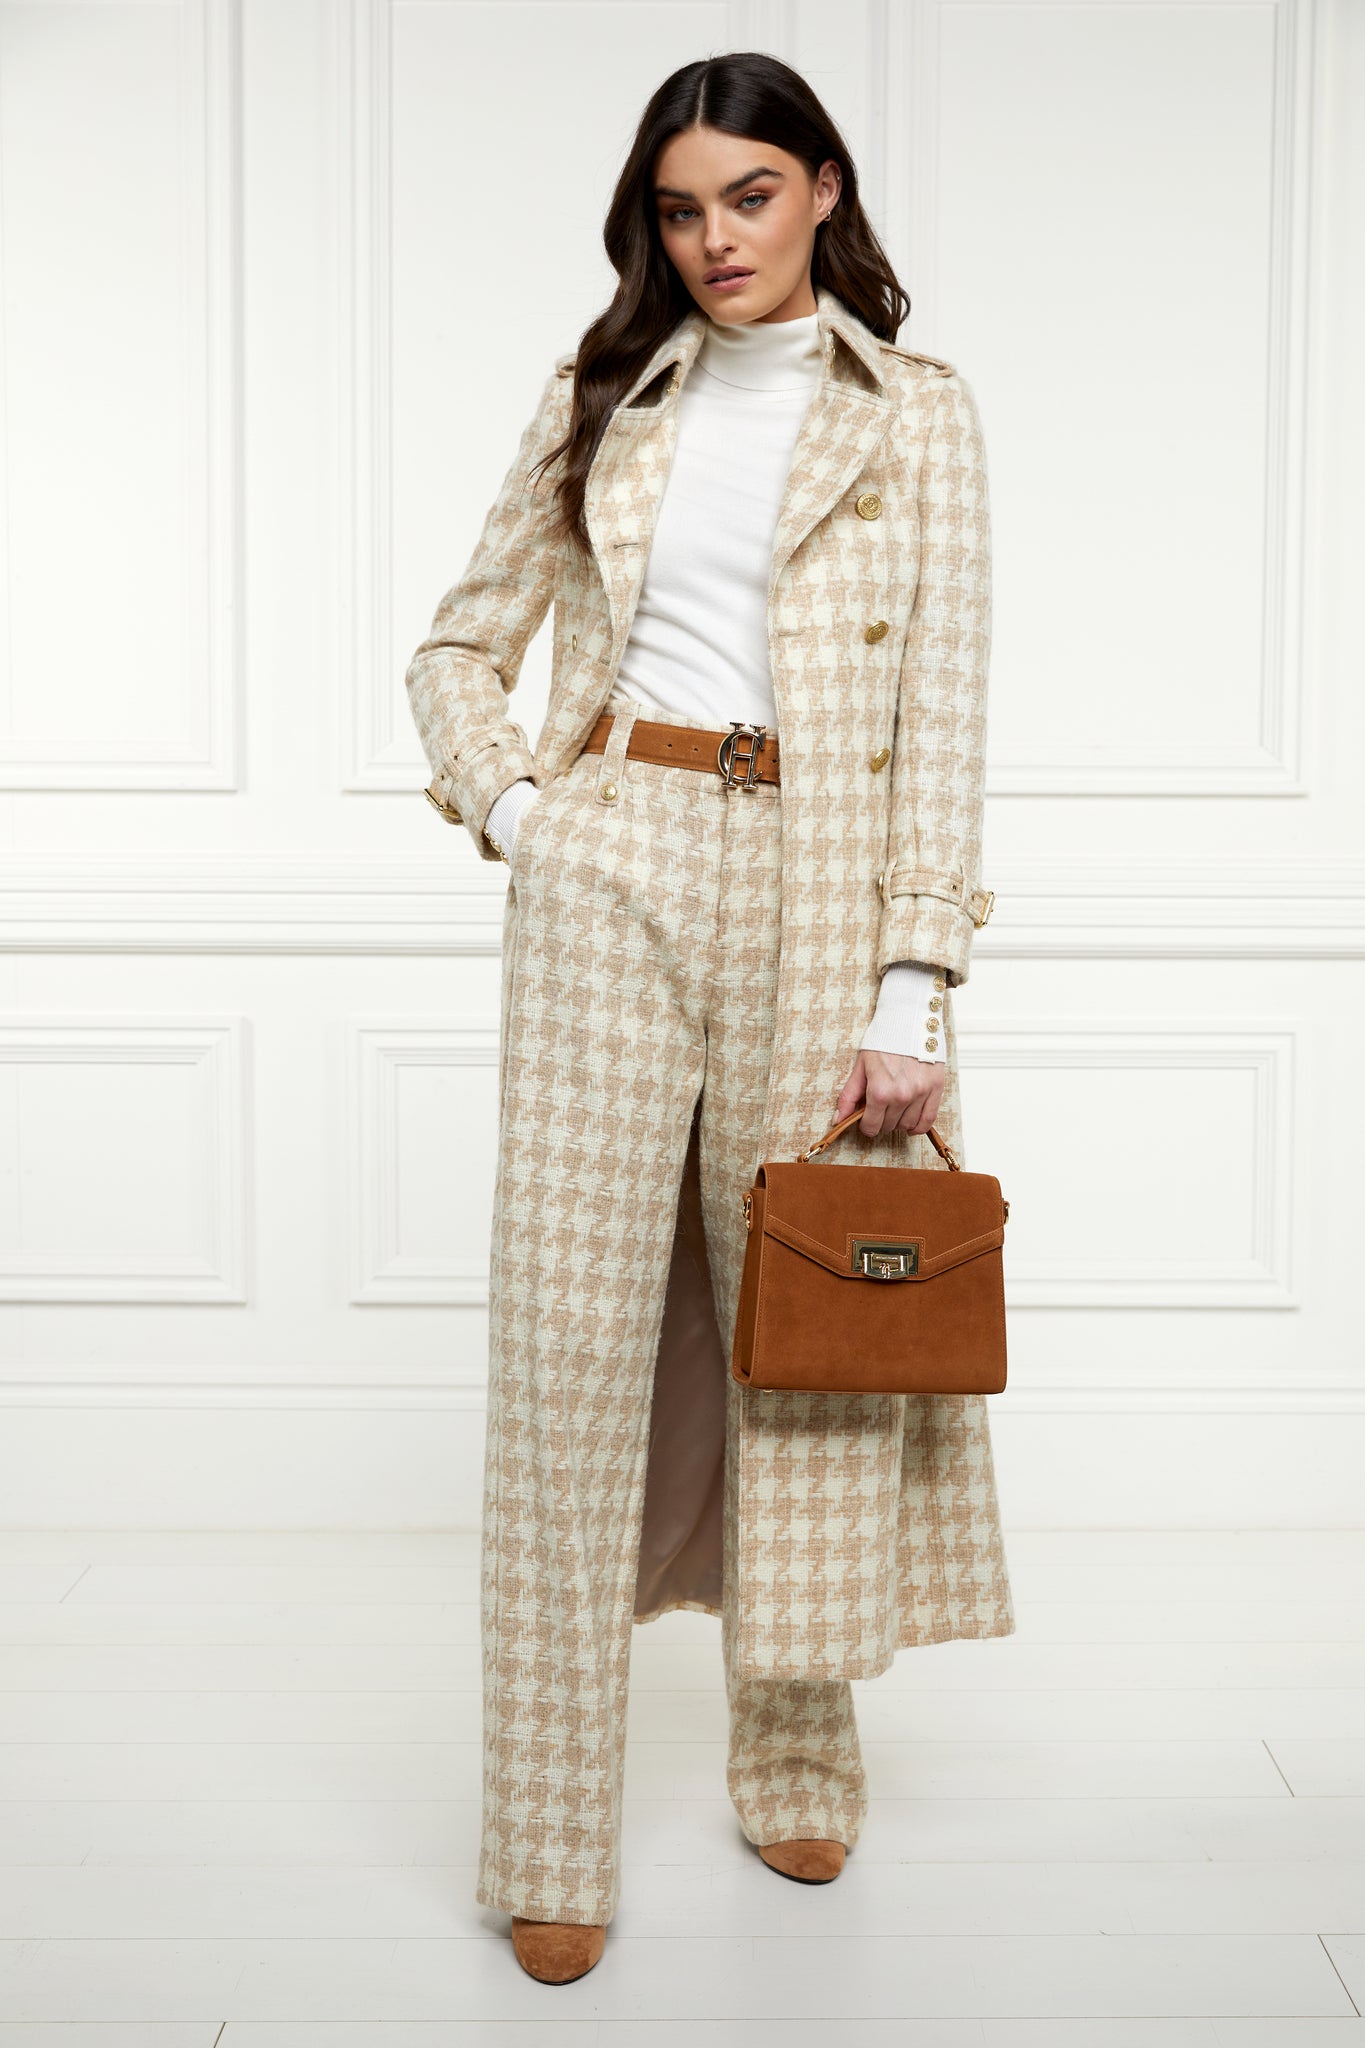 The Camel Houndstooth Look (Alex Coll)